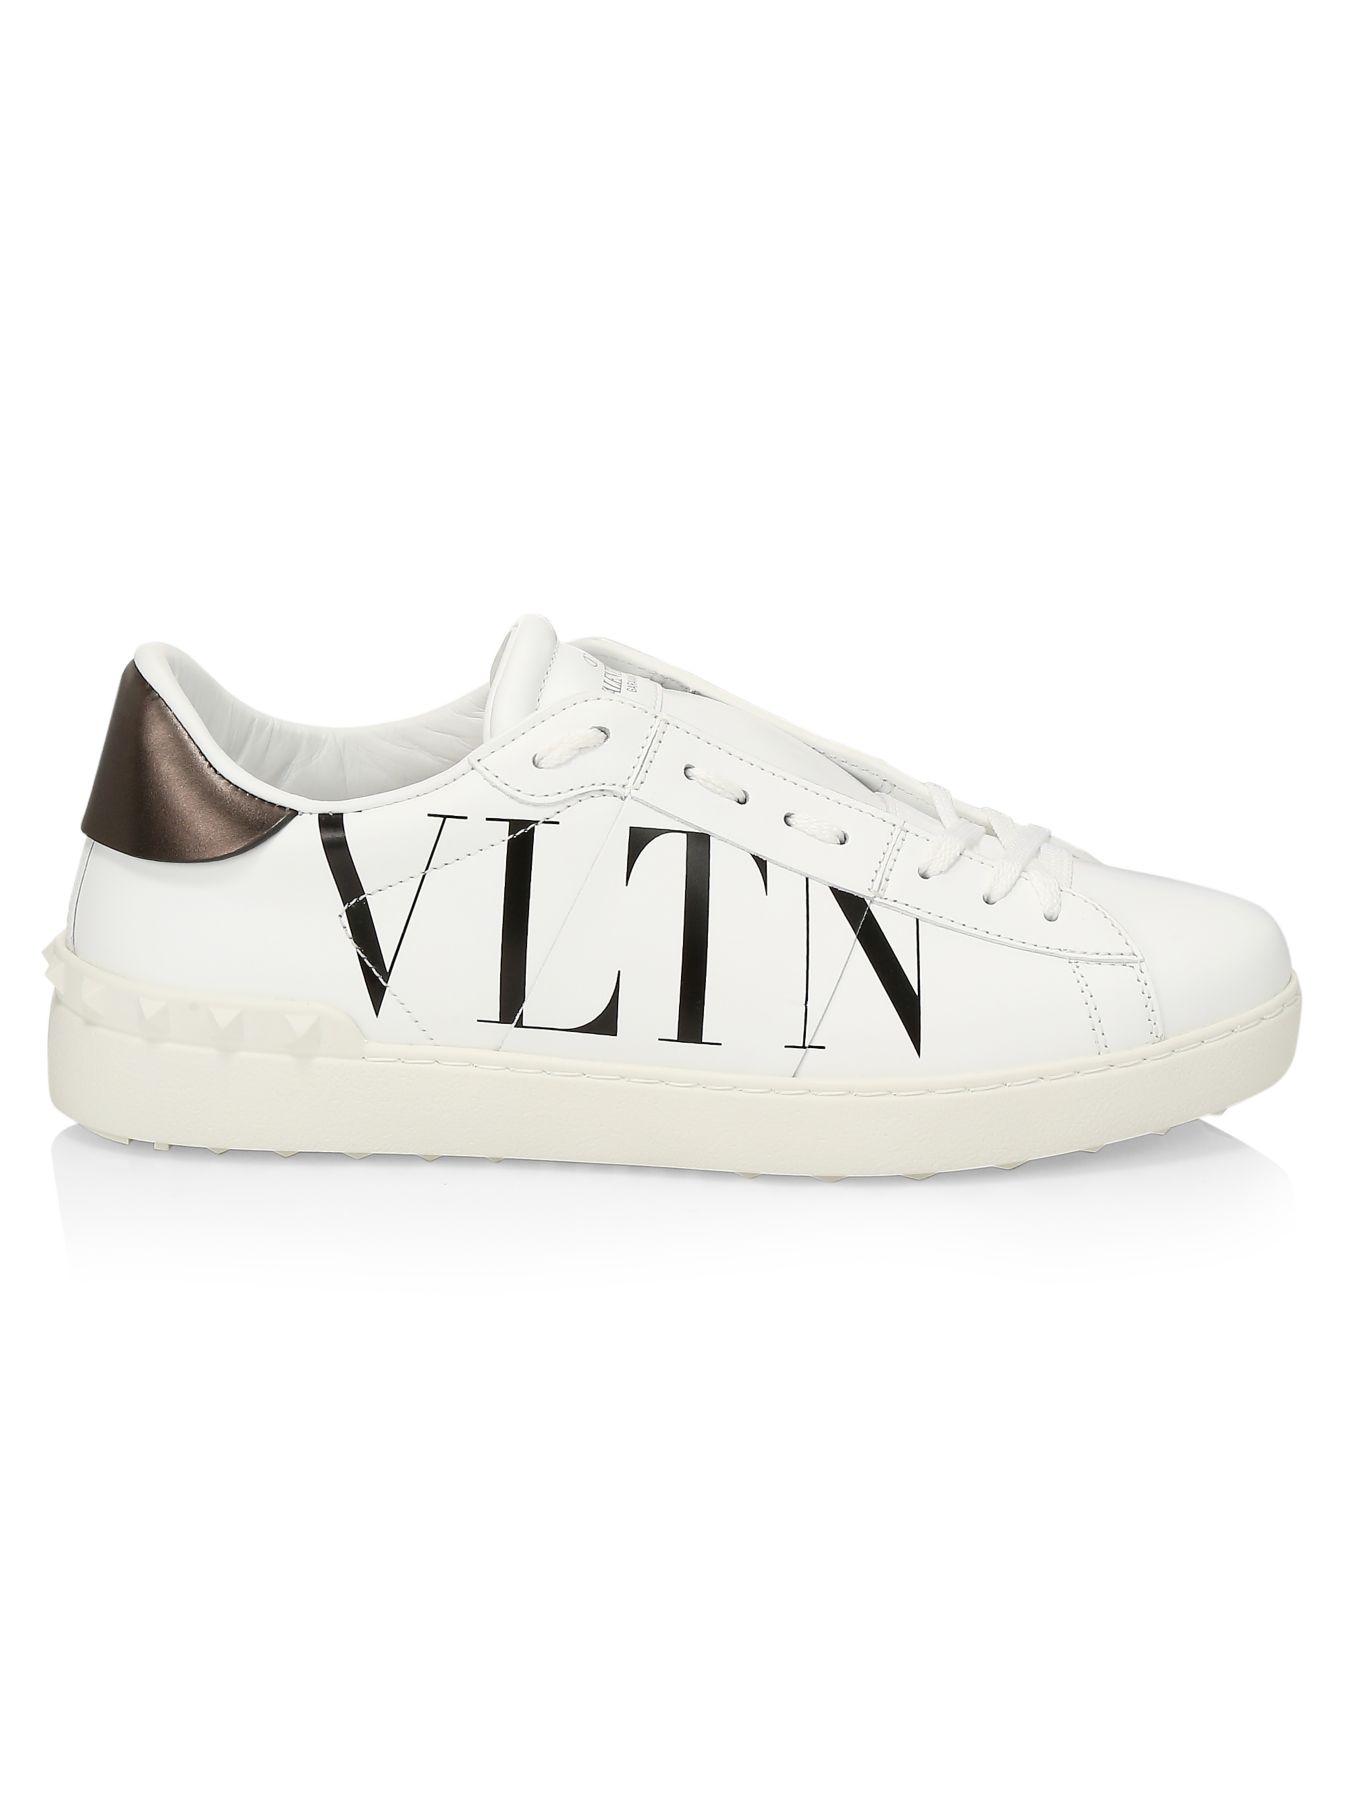 Valentino Logo Leather Low-top Sneakers in White for Men - Save 68% - Lyst